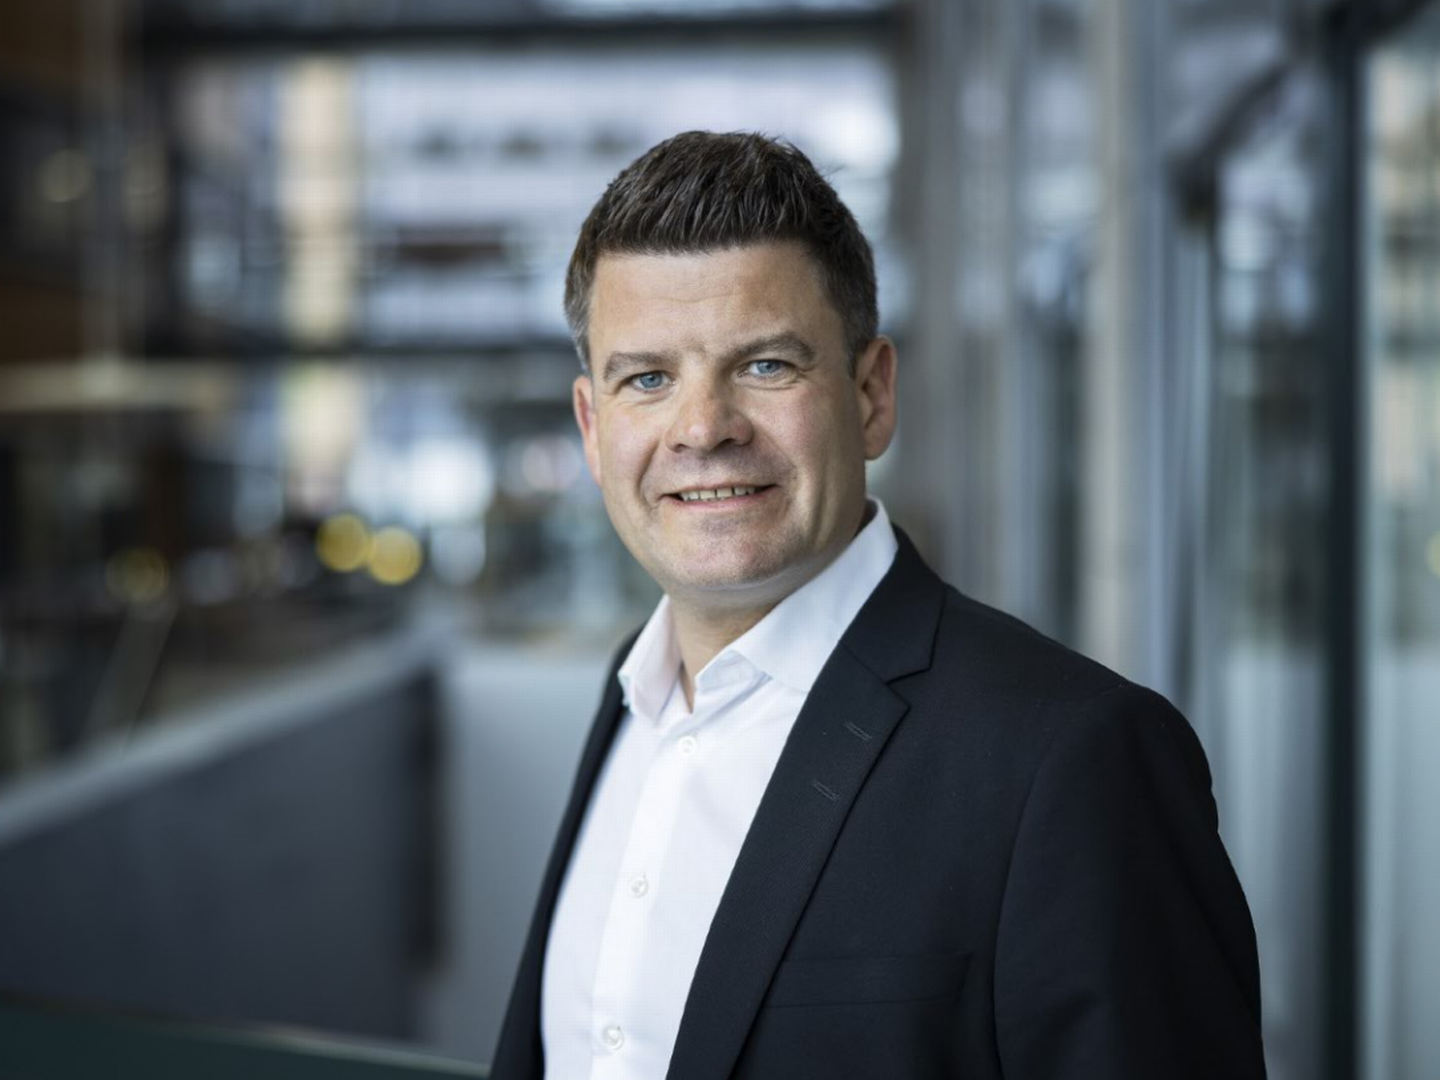 Lasse Kristoffersen, CEO of Wallenius Wilhelmsen, doubts that terminal operators will increase port capacity at the same rate as the many new ships are delivered. | Foto: Wallenius Wilhelmsen